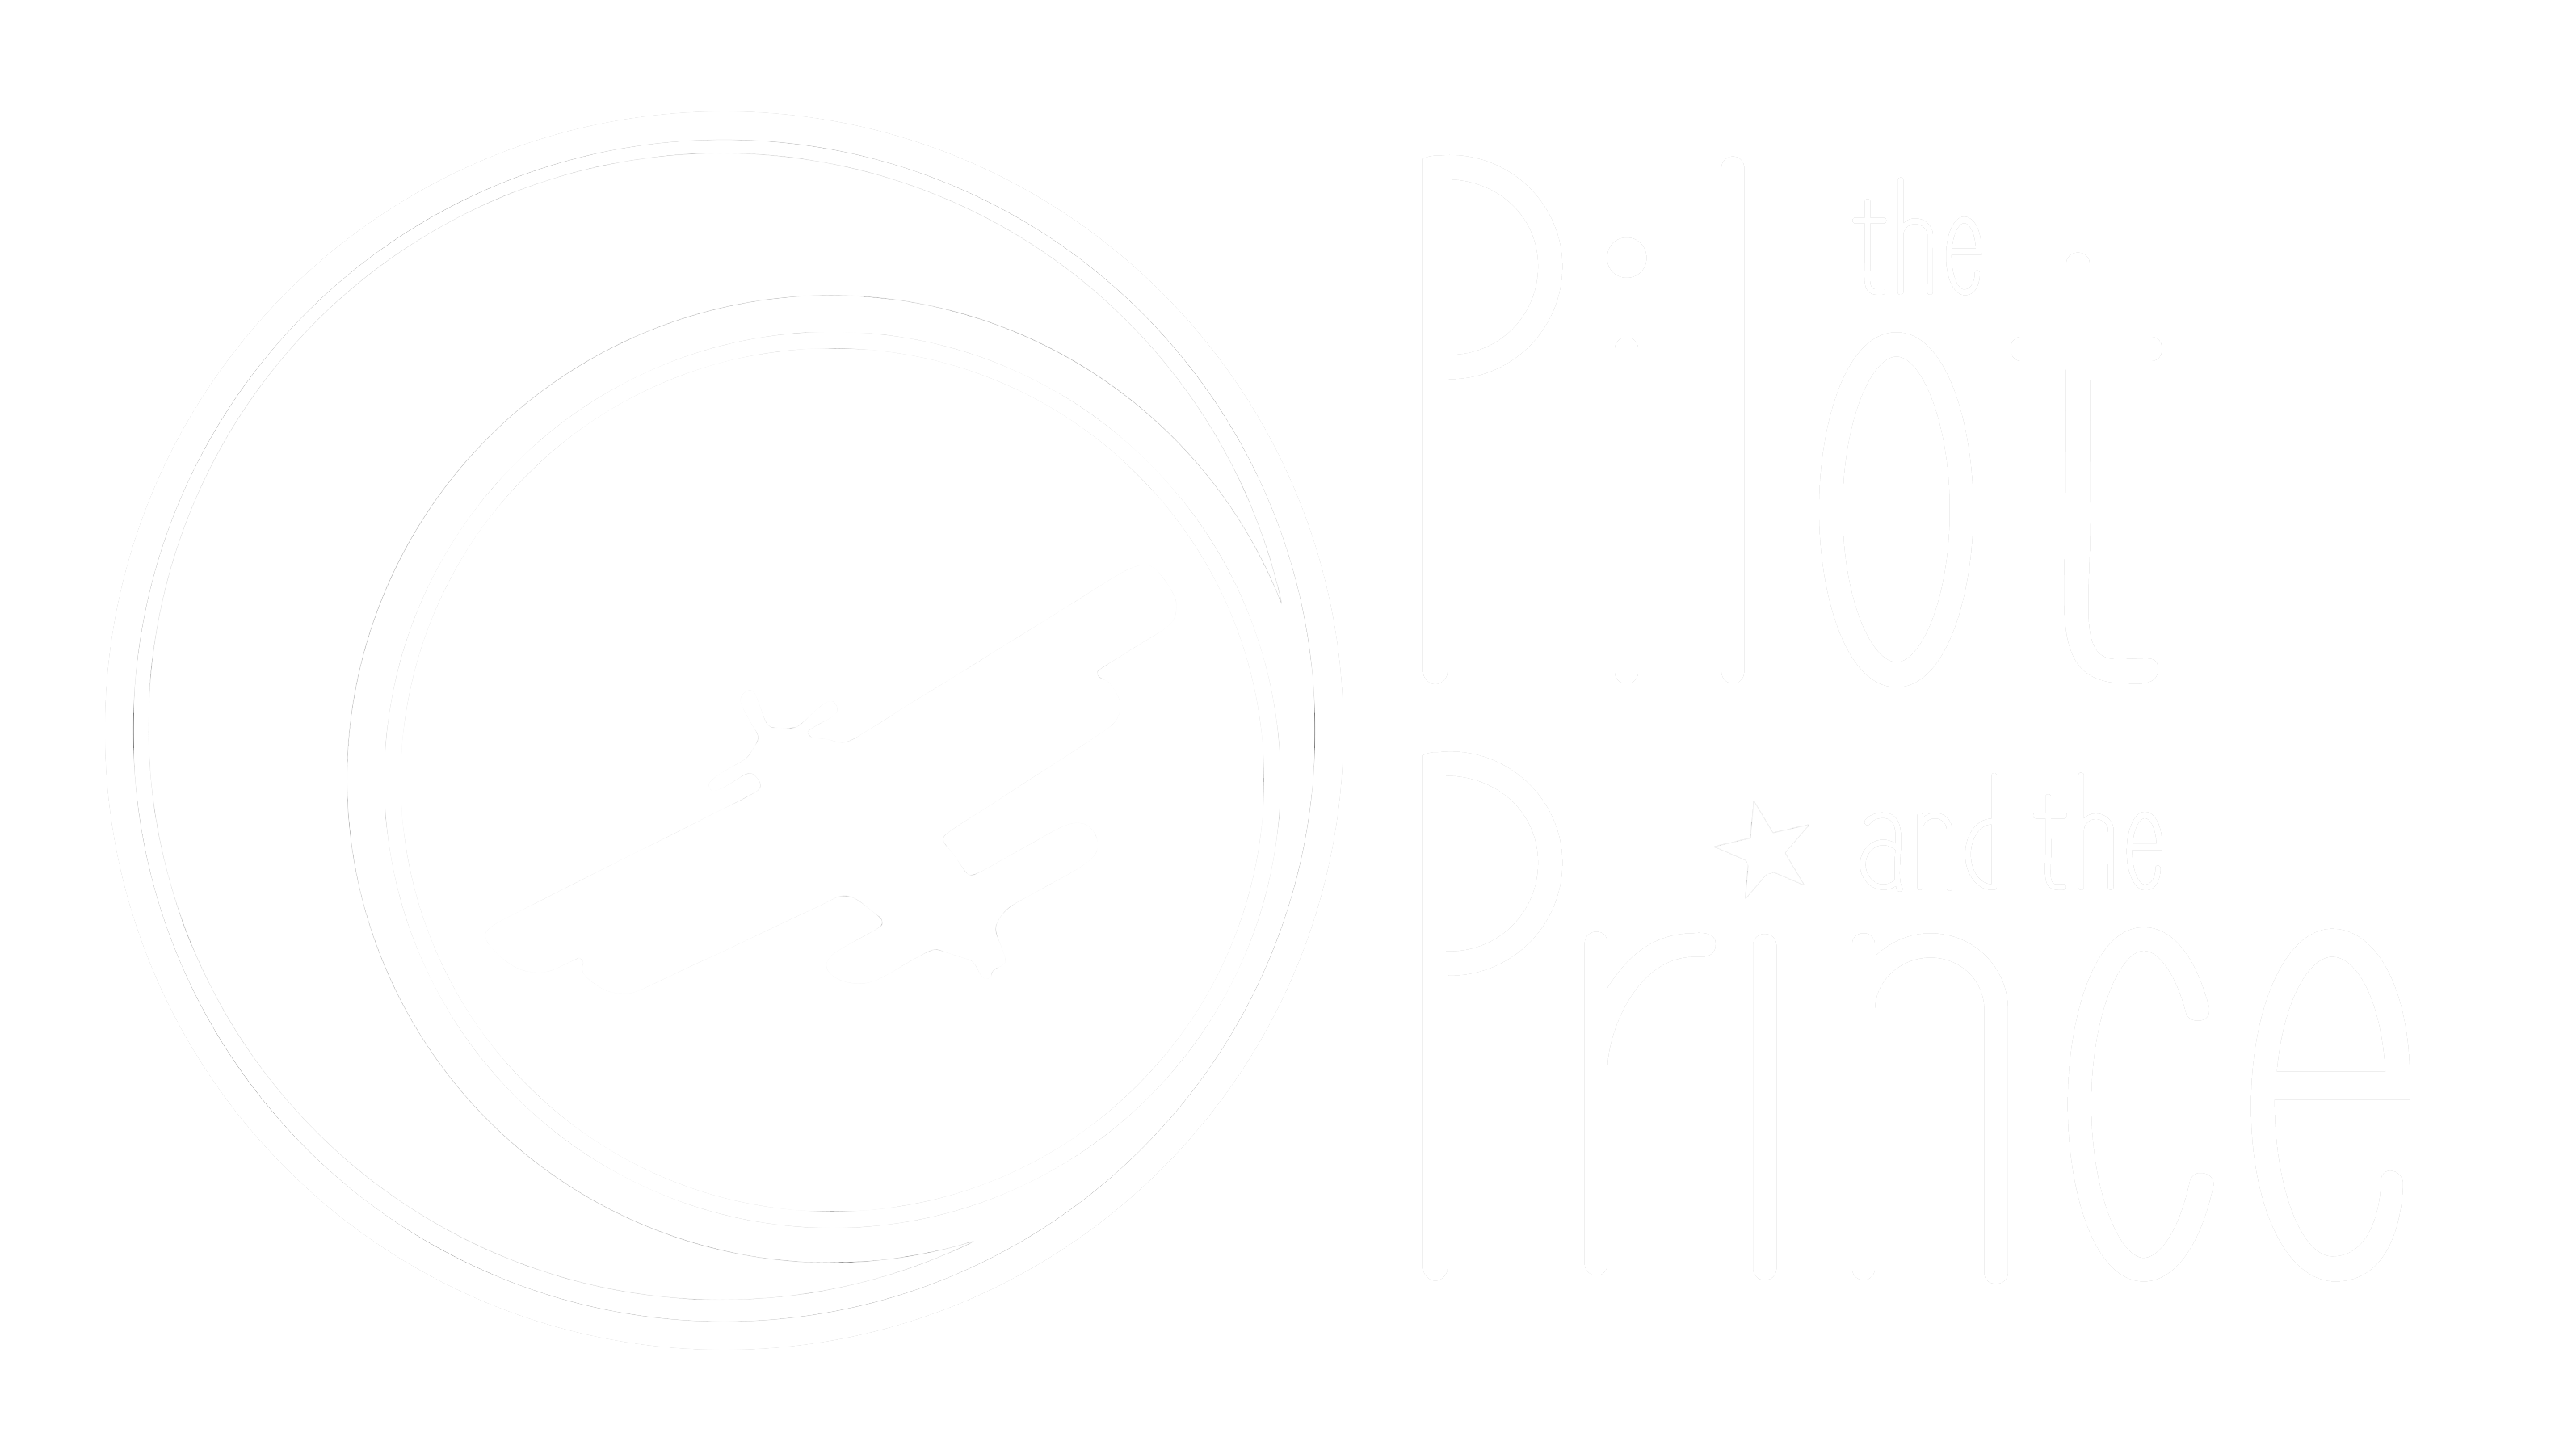 The Pilot and the Prince